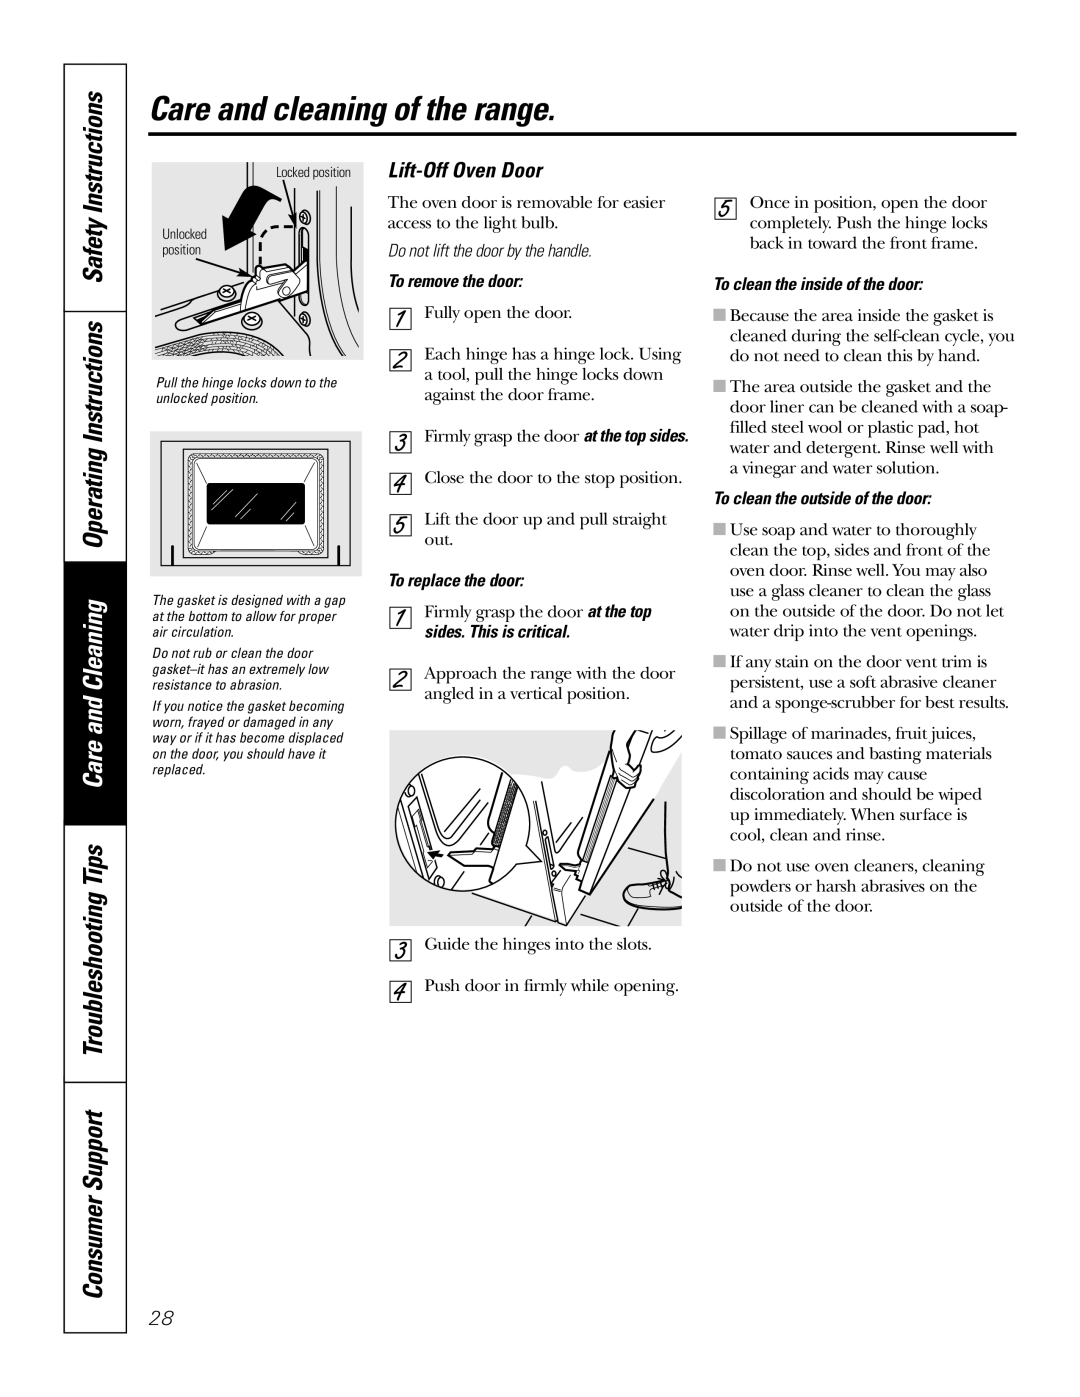 GE 49-80117-1 Tips Care and Cleaning Operating Instructions Safety, Consumer Support Troubleshooting, Lift-Off Oven Door 